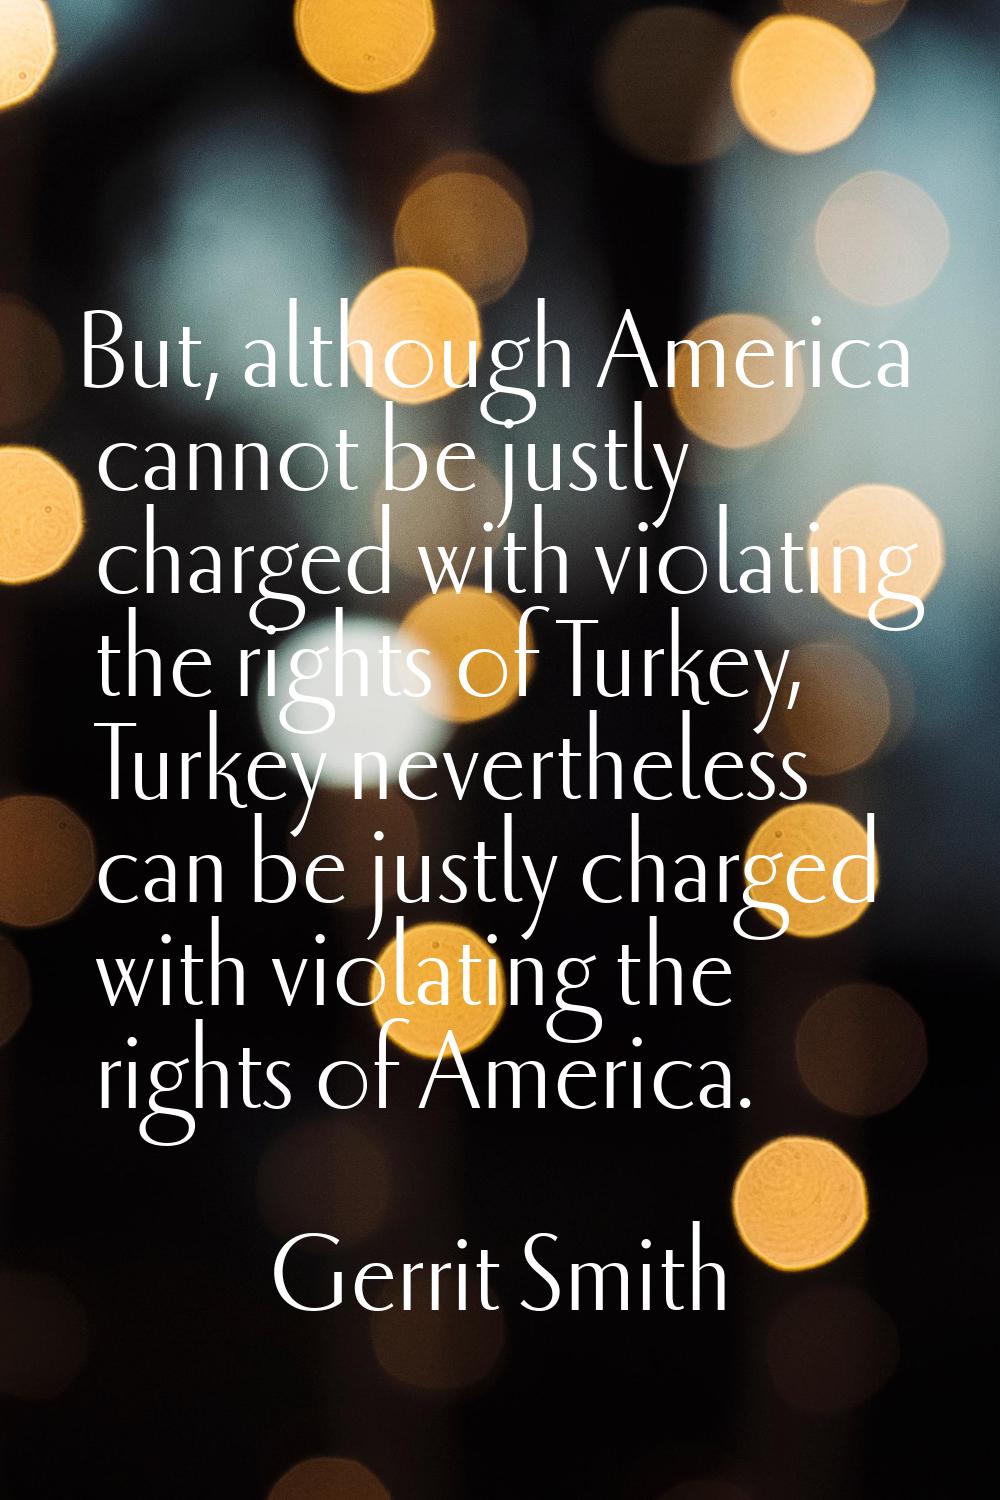 But, although America cannot be justly charged with violating the rights of Turkey, Turkey neverthe